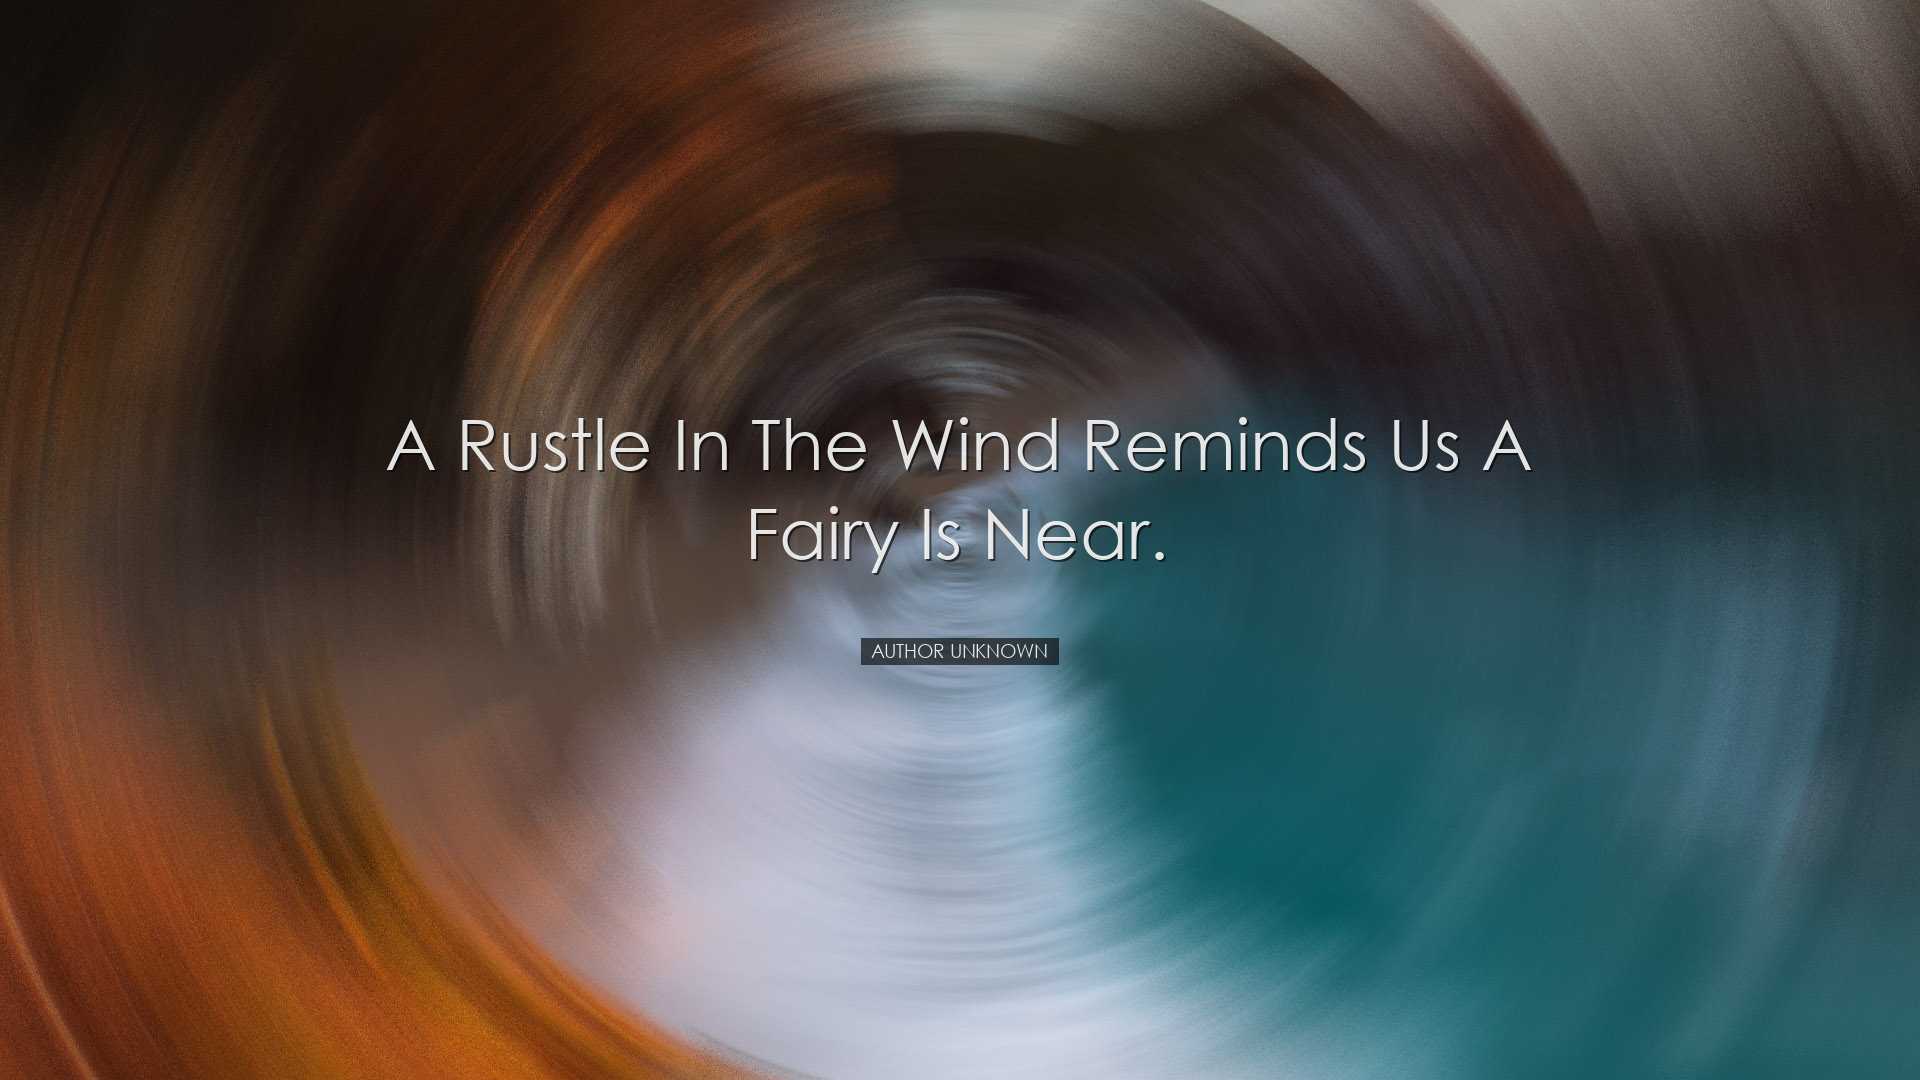 A rustle in the wind reminds us a fairy is near. - Author Unknown